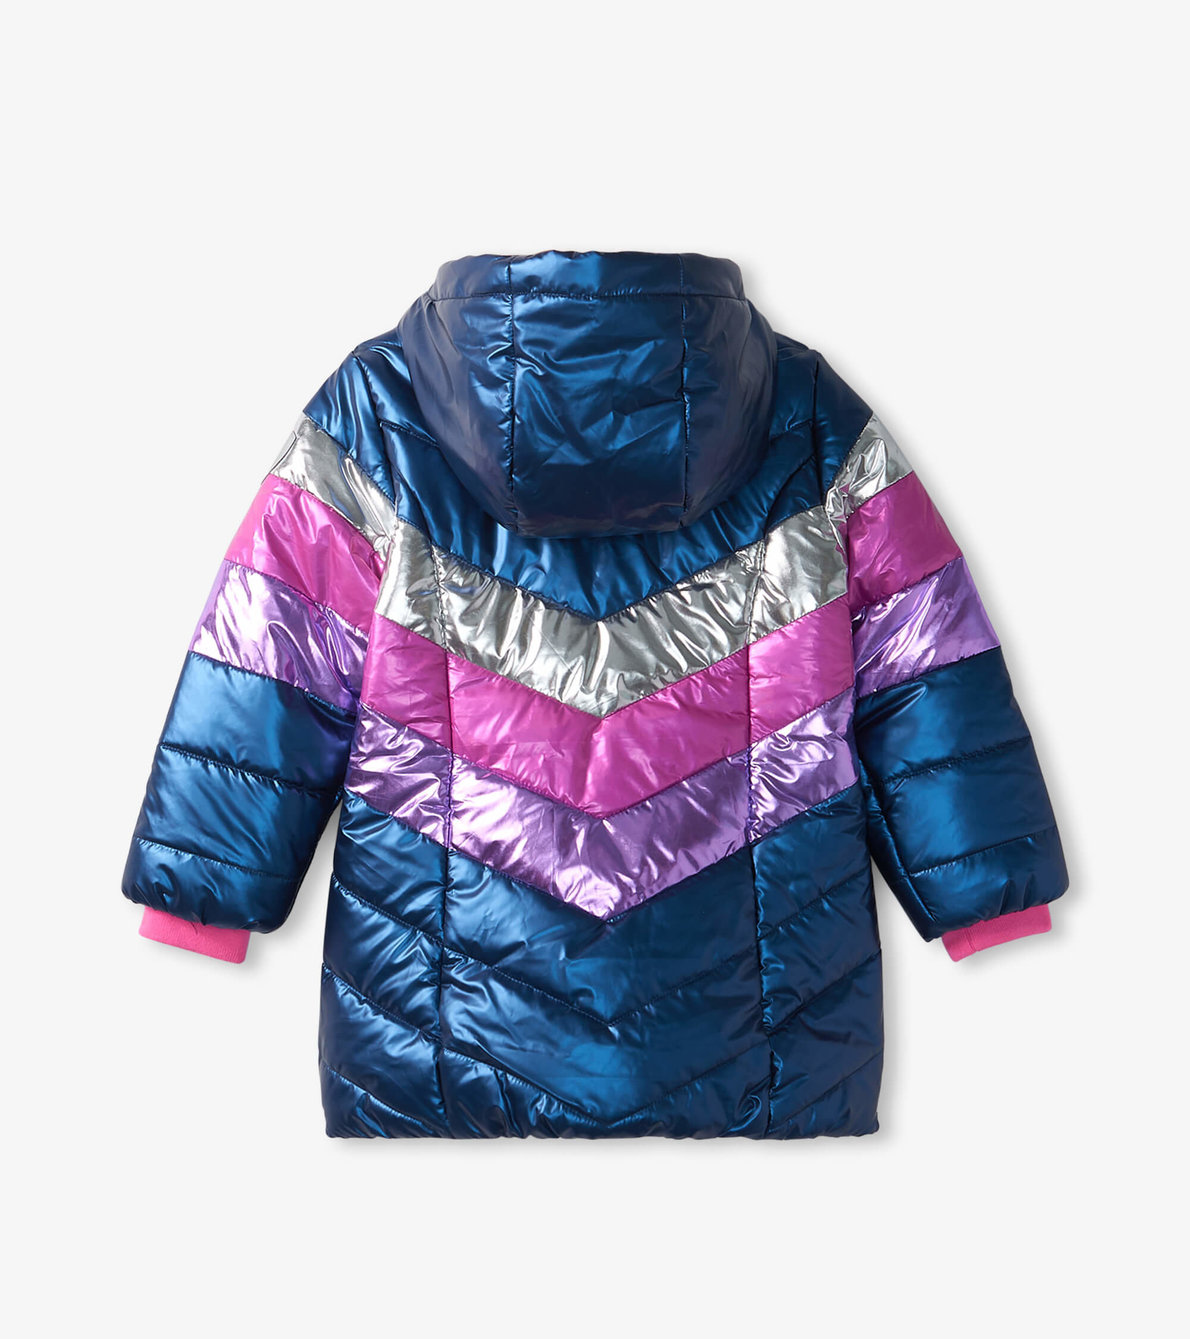 View larger image of Rainbows Kids Puffer Jacket